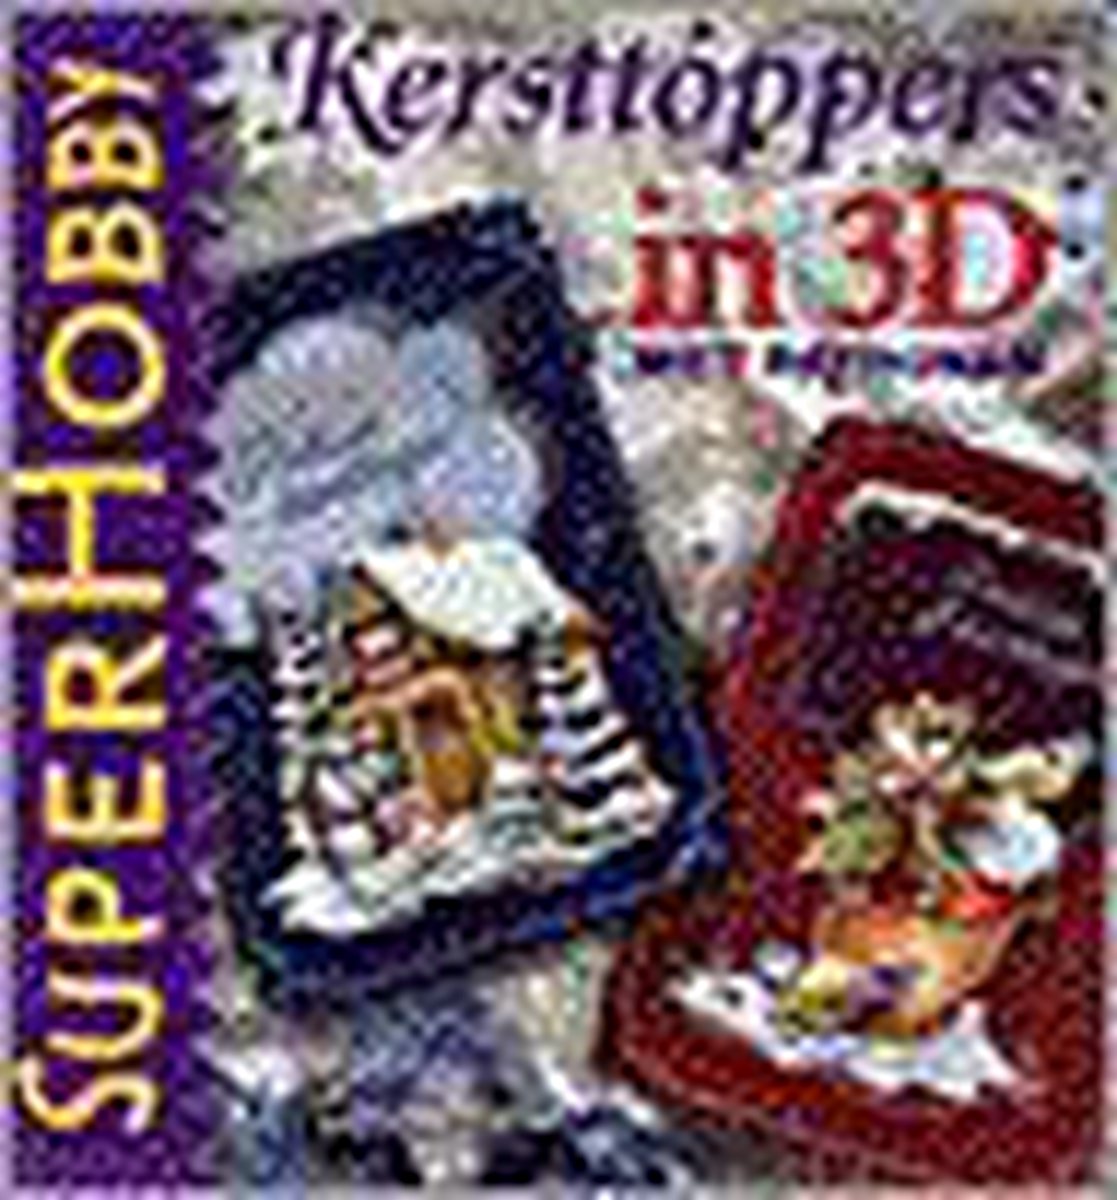 Kersttoppers in 3d